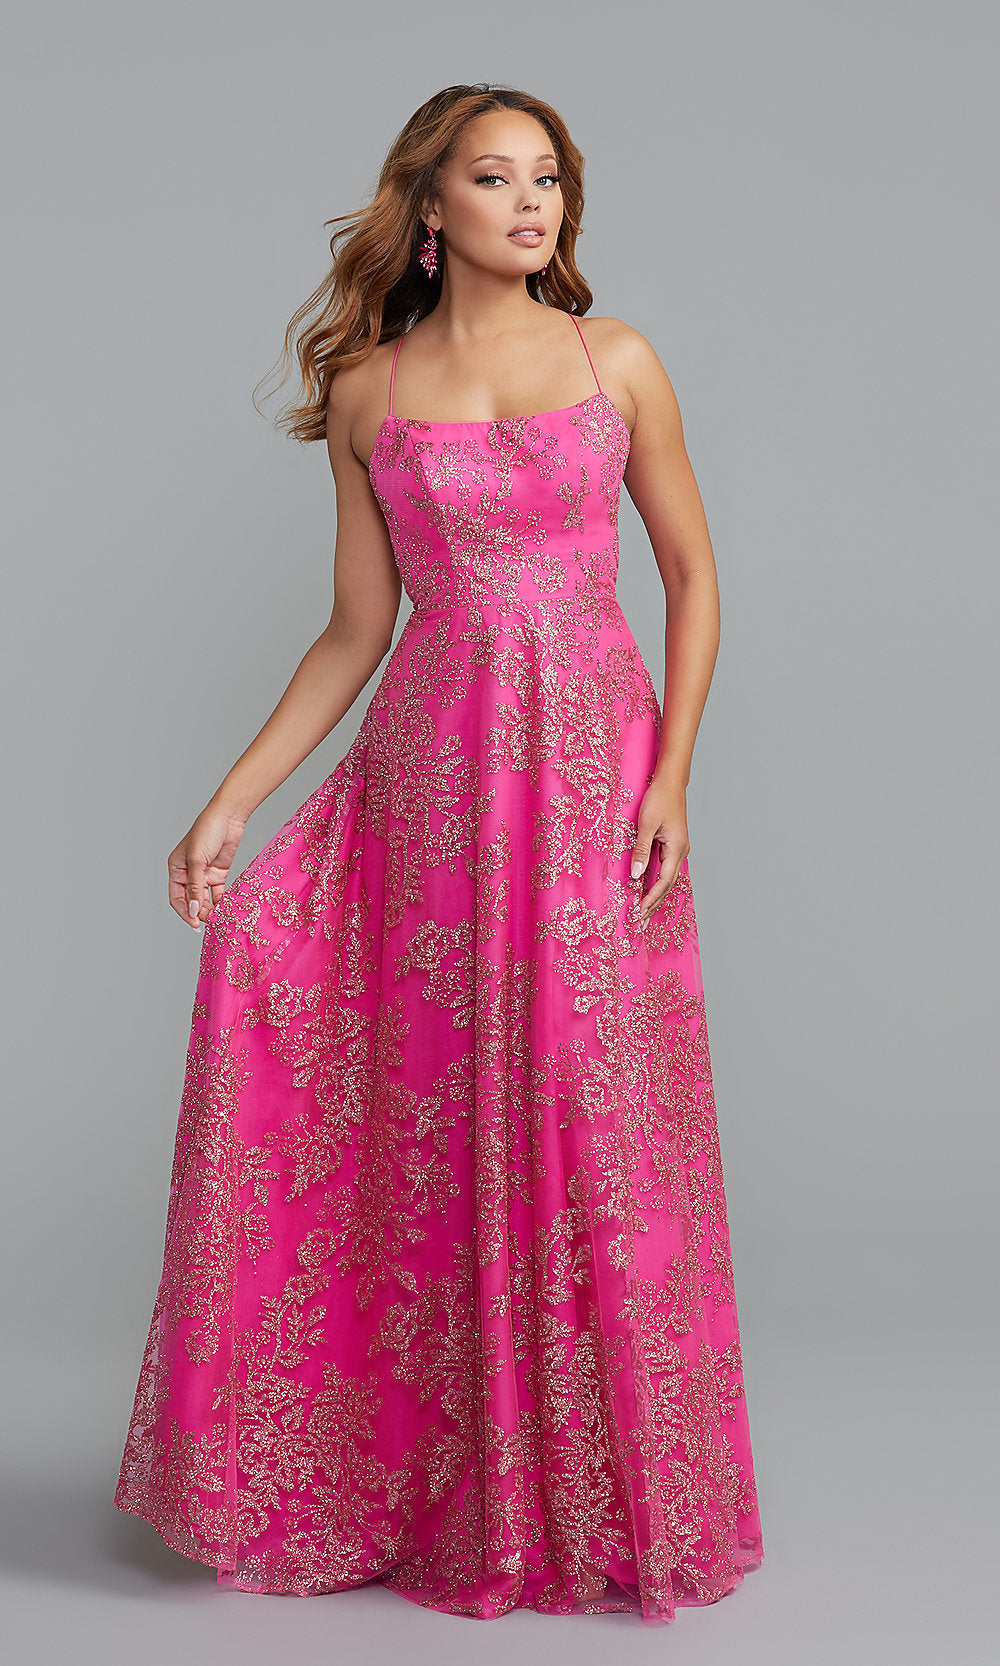  Sequin-Tulle Long Prom Dress in Fuchsia Pink